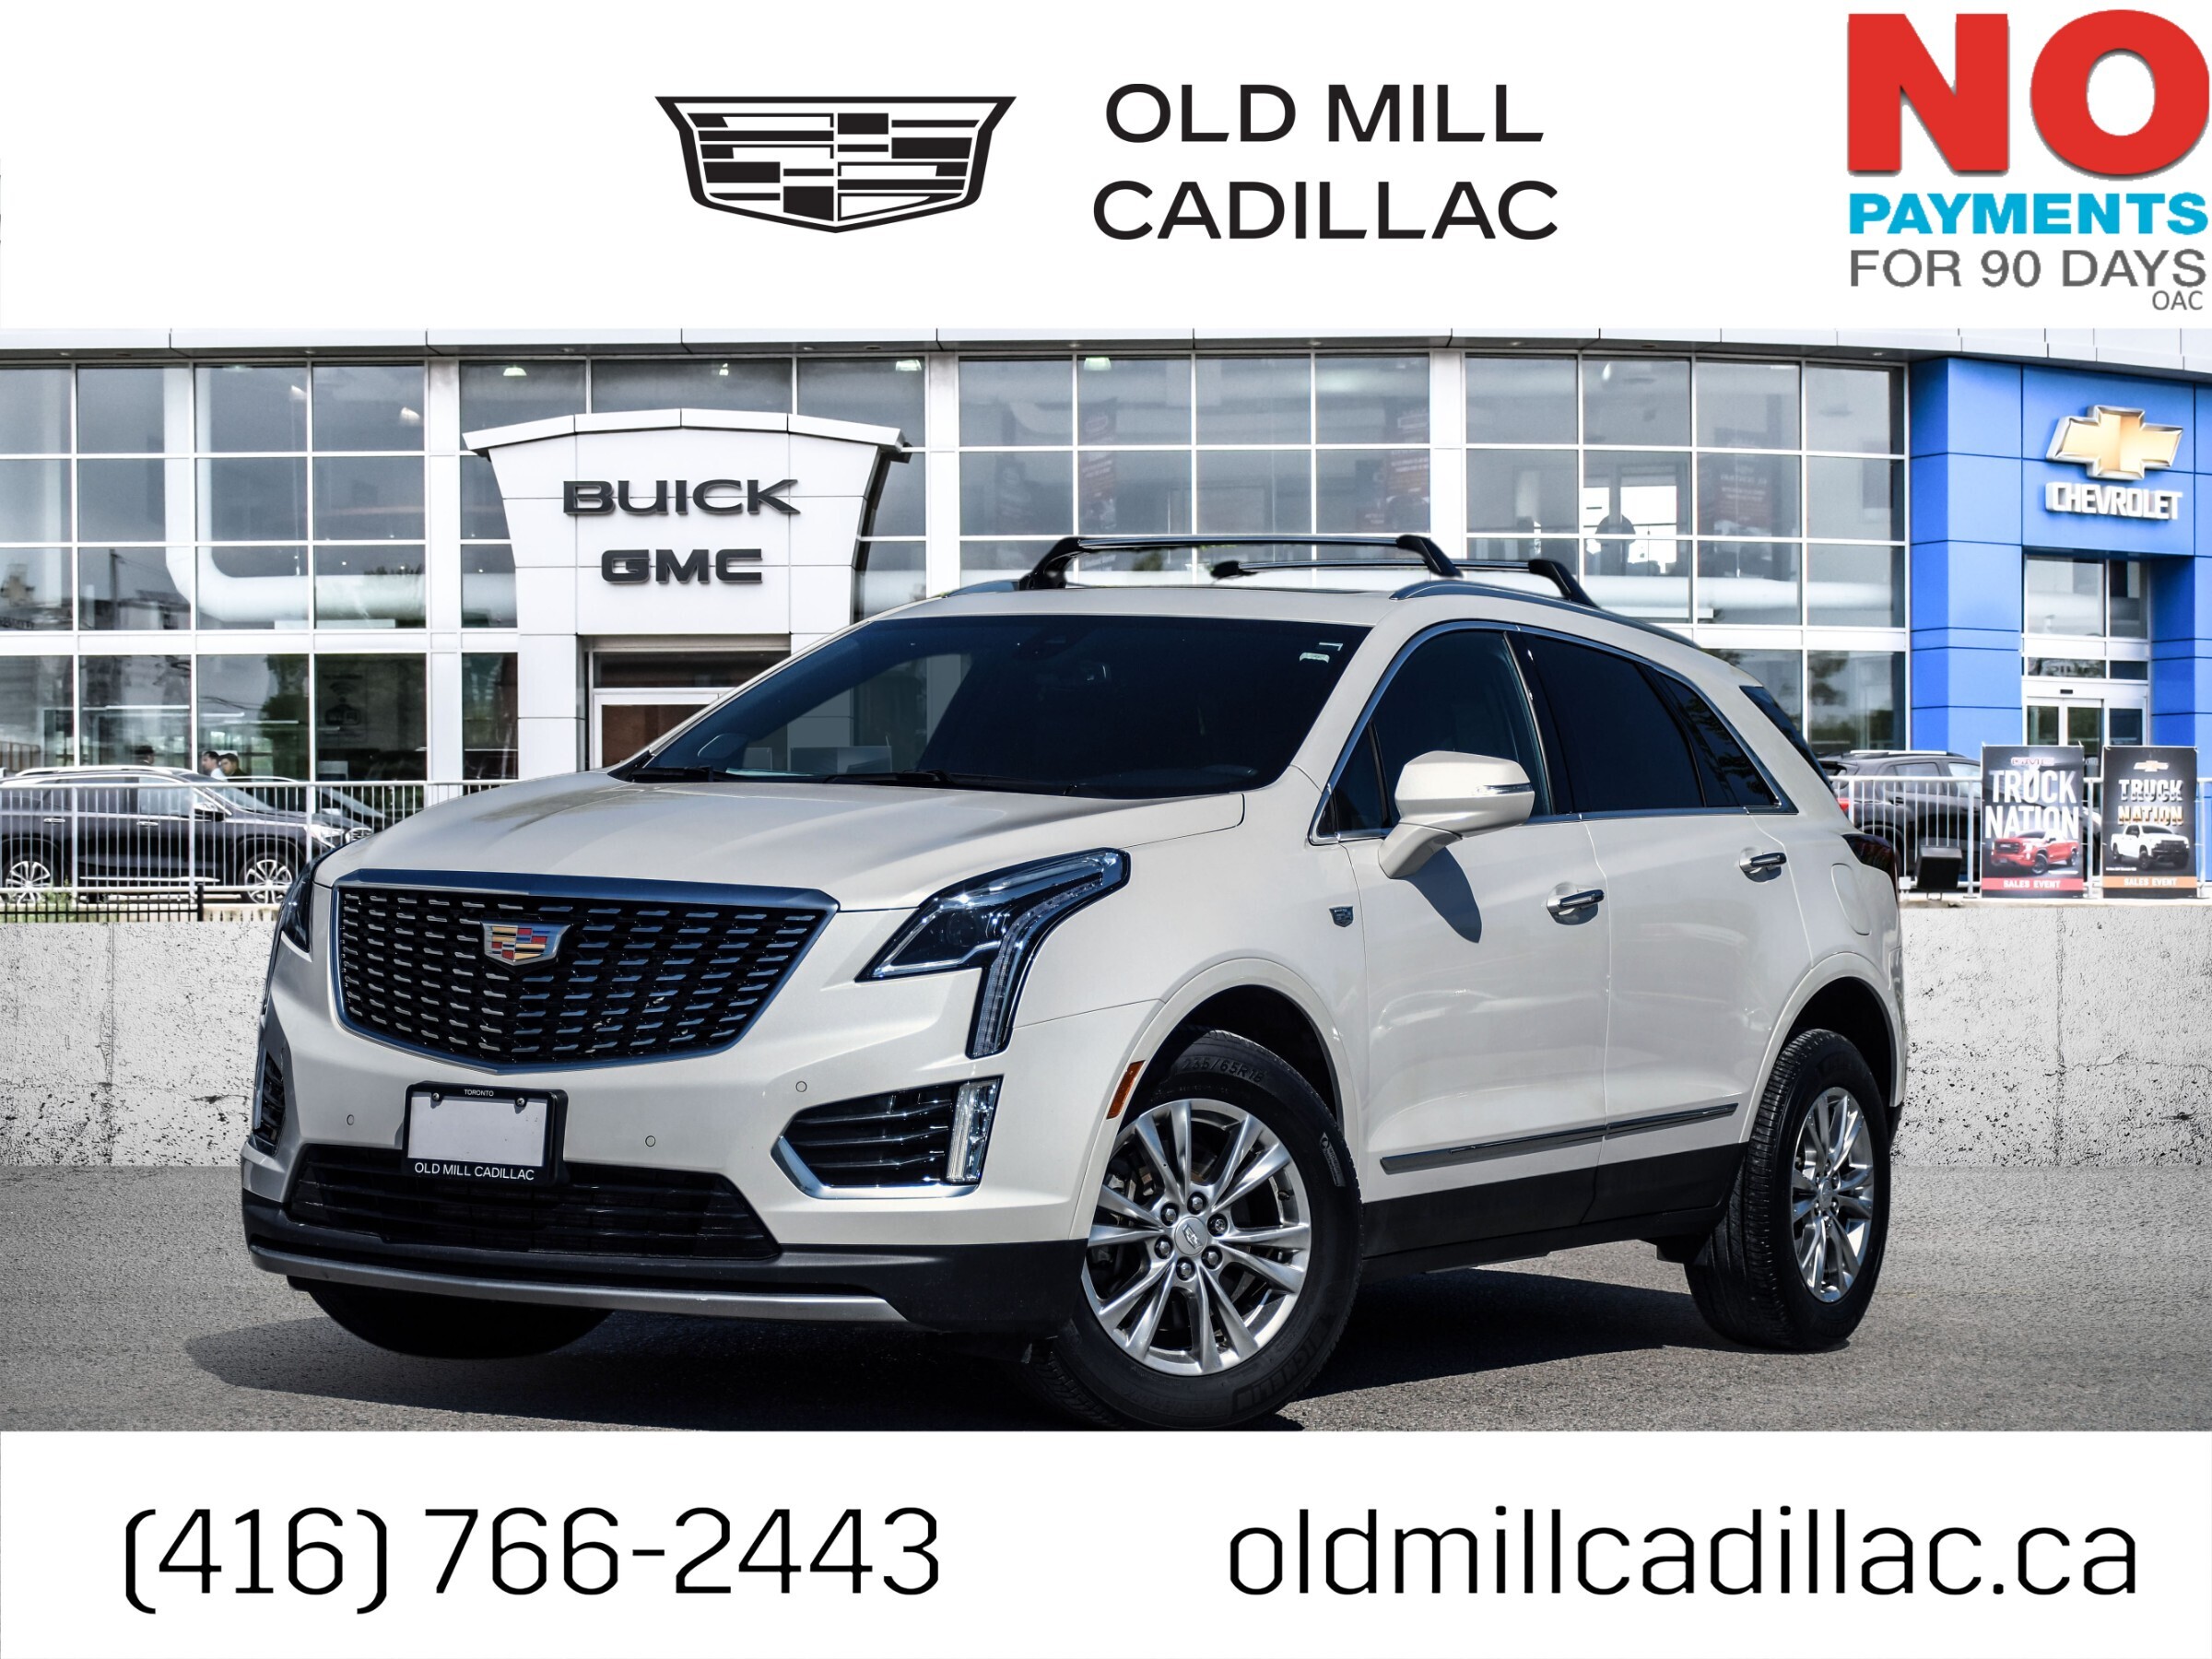 2020 Cadillac XT5 CLEAN CARFAX | PANO ROOF | POWER TRUNK